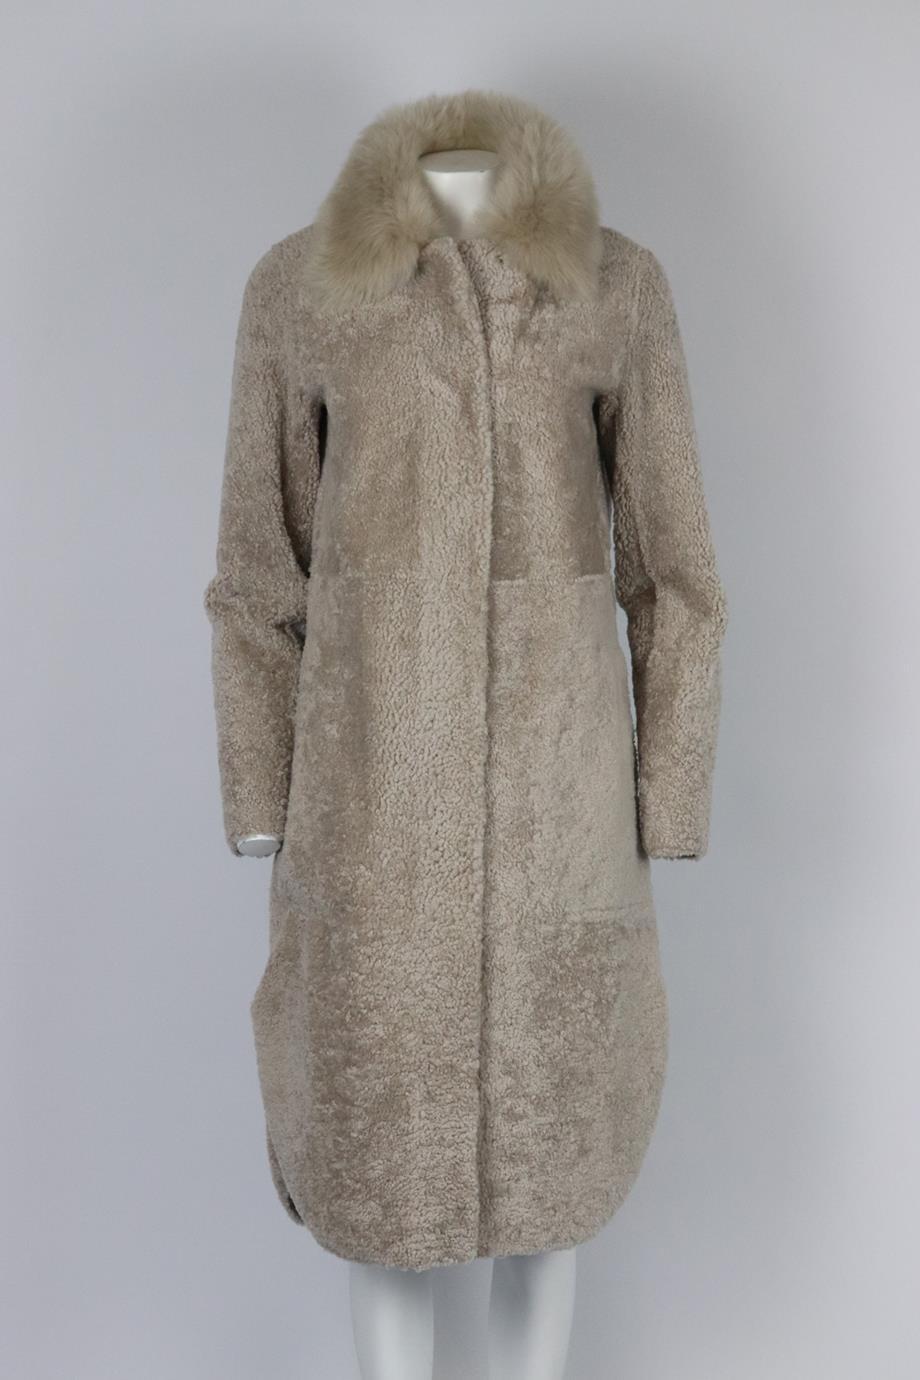 Theory belted shearling coat. Grey. Long sleeve, crewneck. Snap button and belt fastening at front. 100% Leather; fabric2: 100% lamb. Size: XSmall (UK 6, US 2, FR 34, IT 38). Shoulder to shoulder: 17 in. Bust: 40 in. Waist: 41 in. Hips: 46 in.